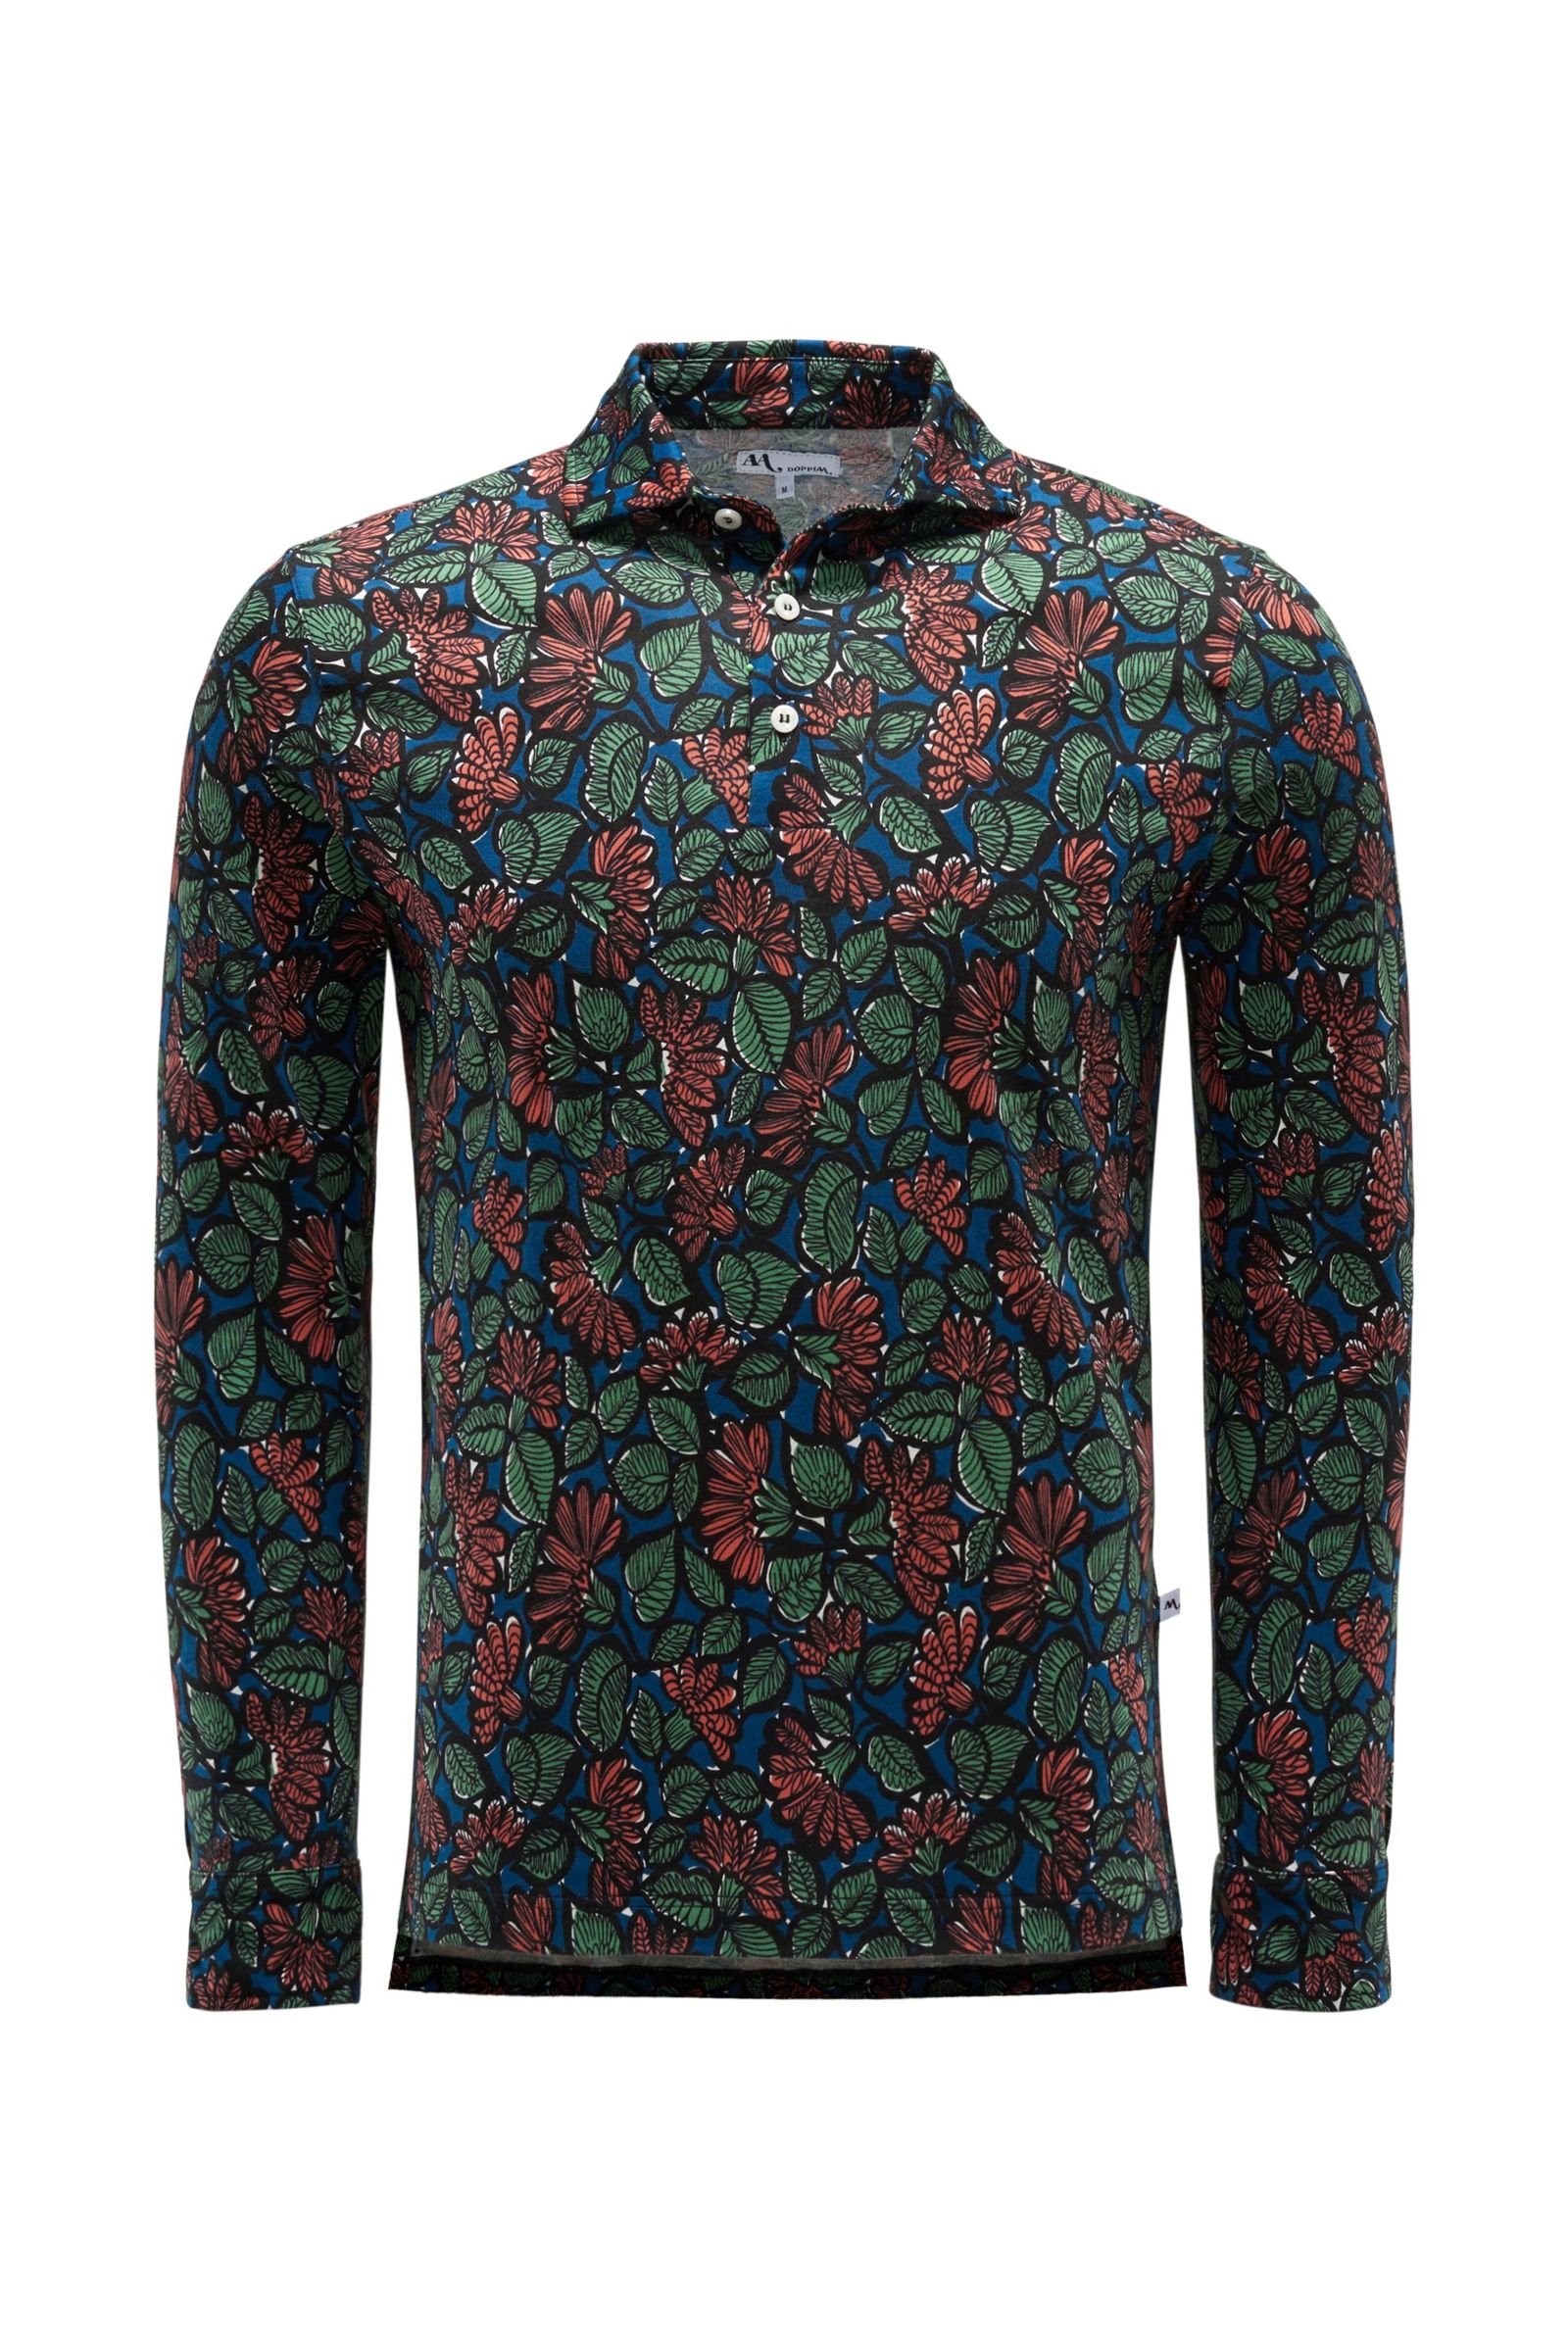 Long sleeve polo shirt 'Aapollo' dark blue/green patterned